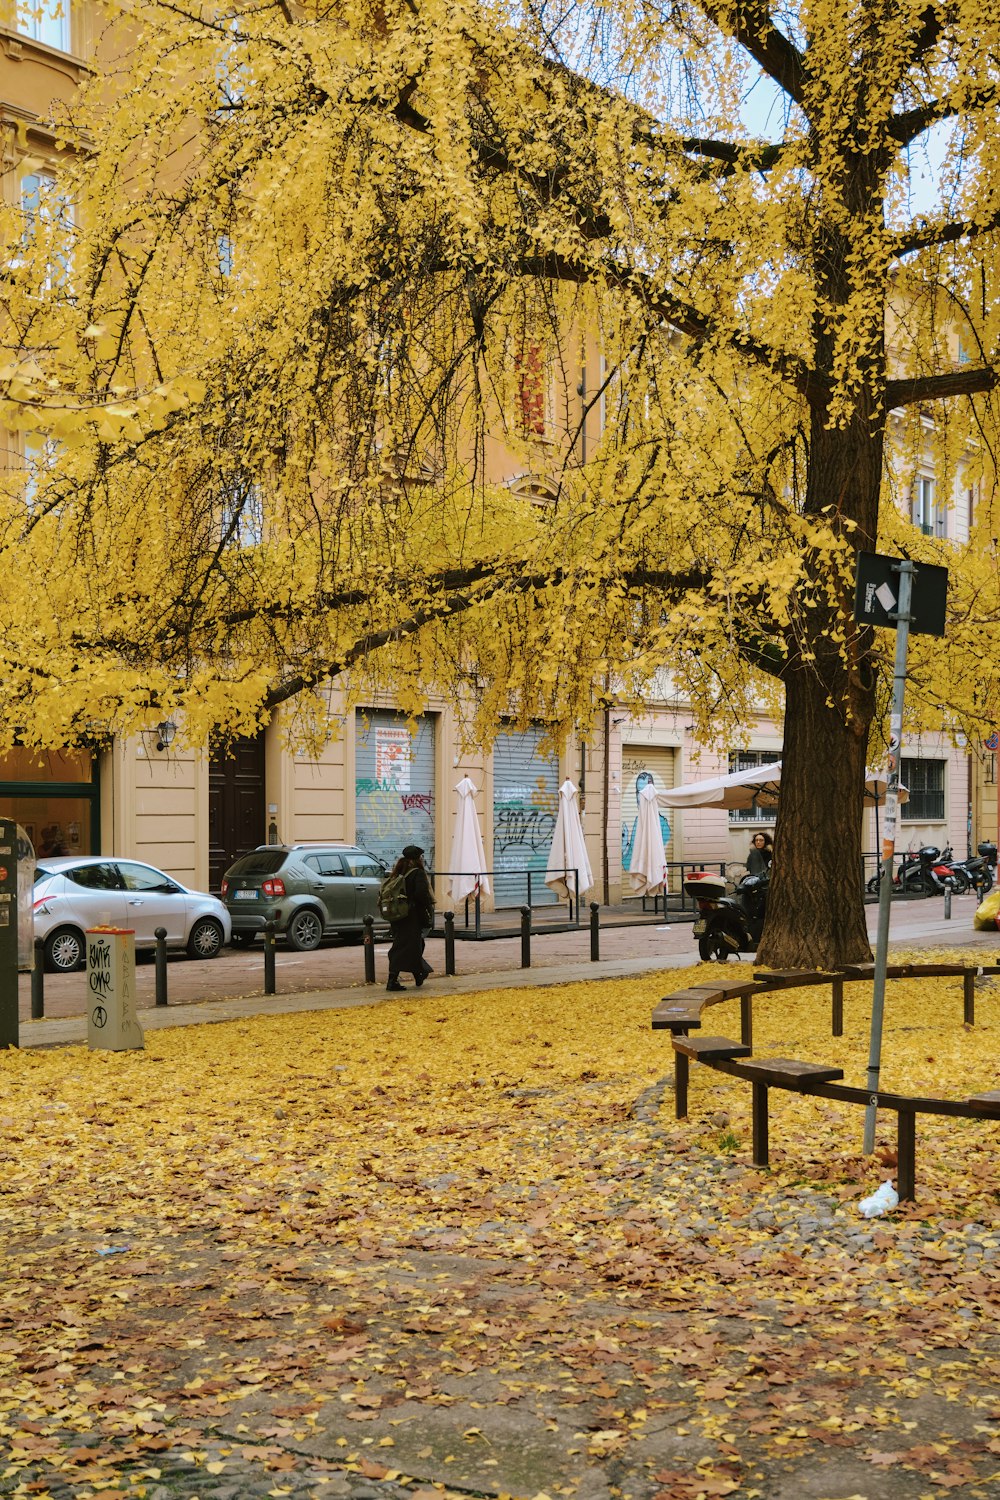 a tree with yellow leaves on the ground